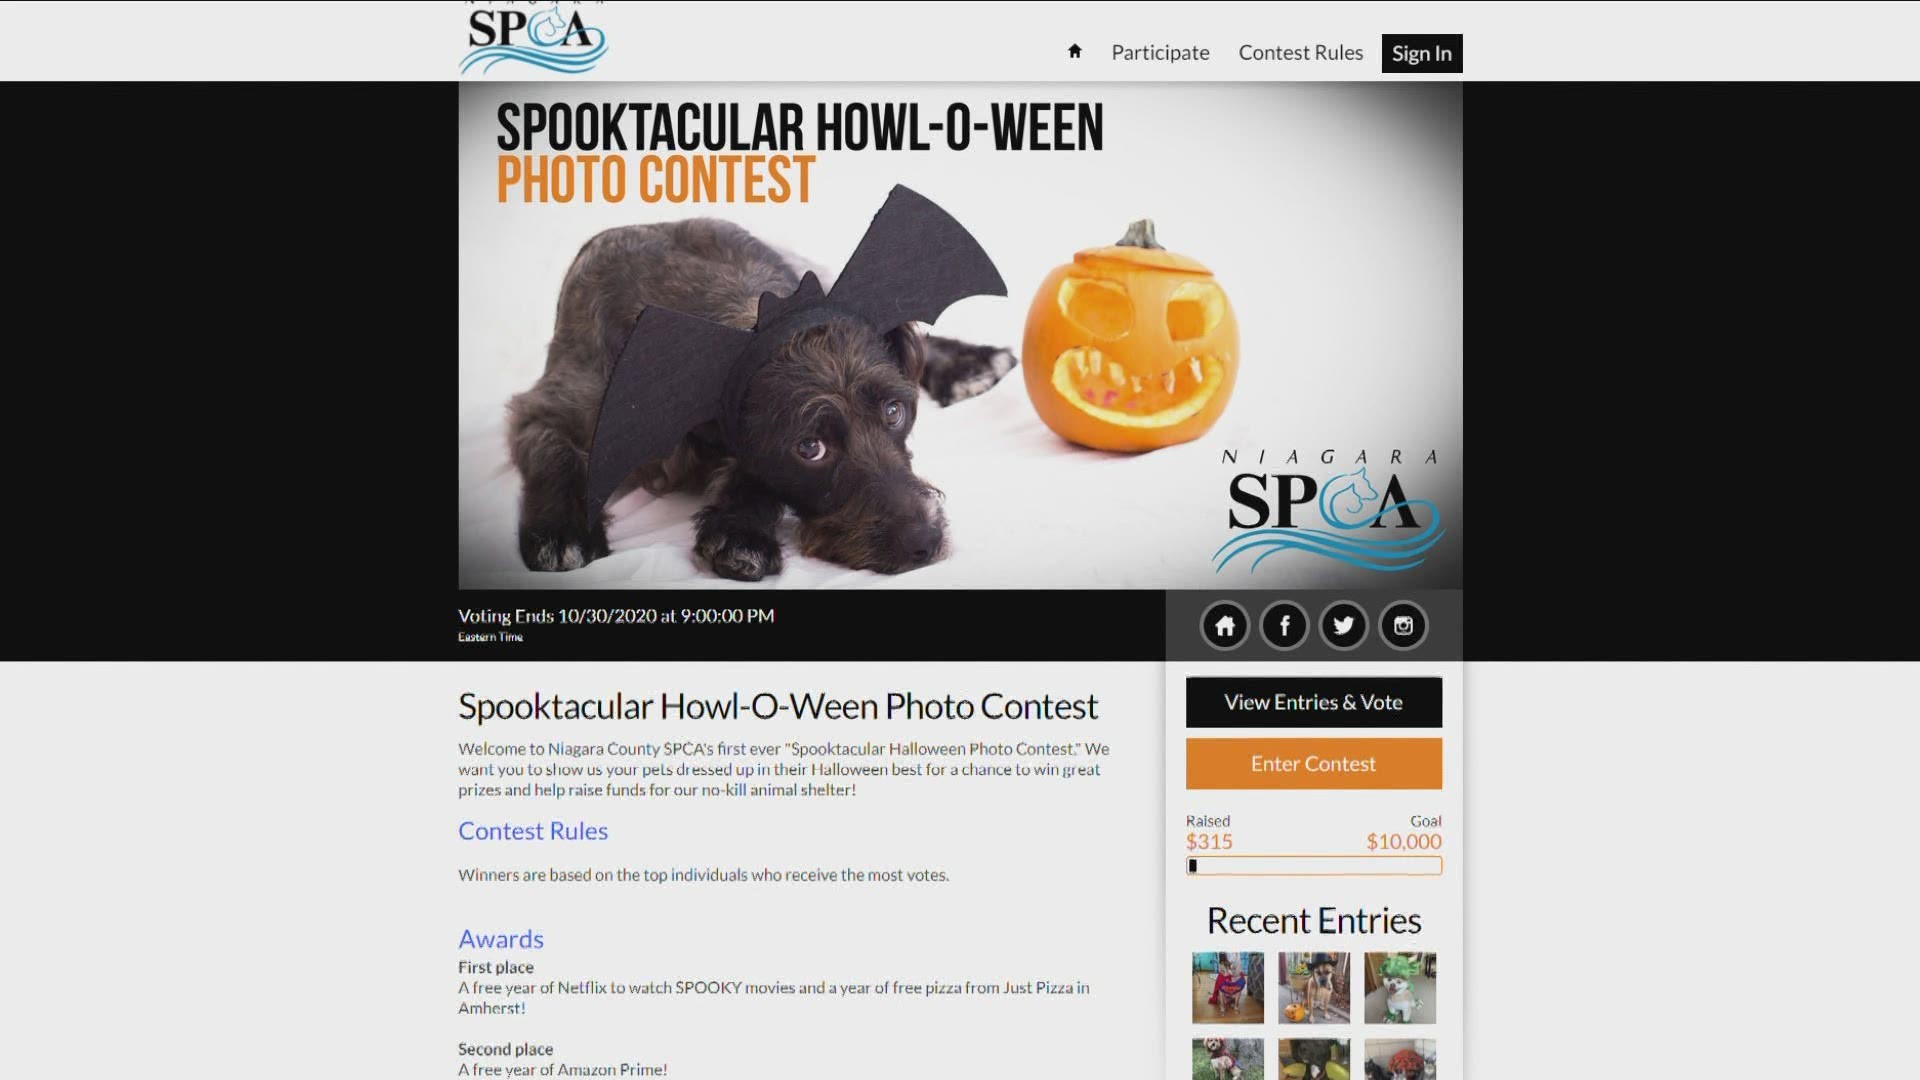 The Niagara County SPCA is throwing a "spook-tacular howl-o-ween" photo contest and fundraiser.